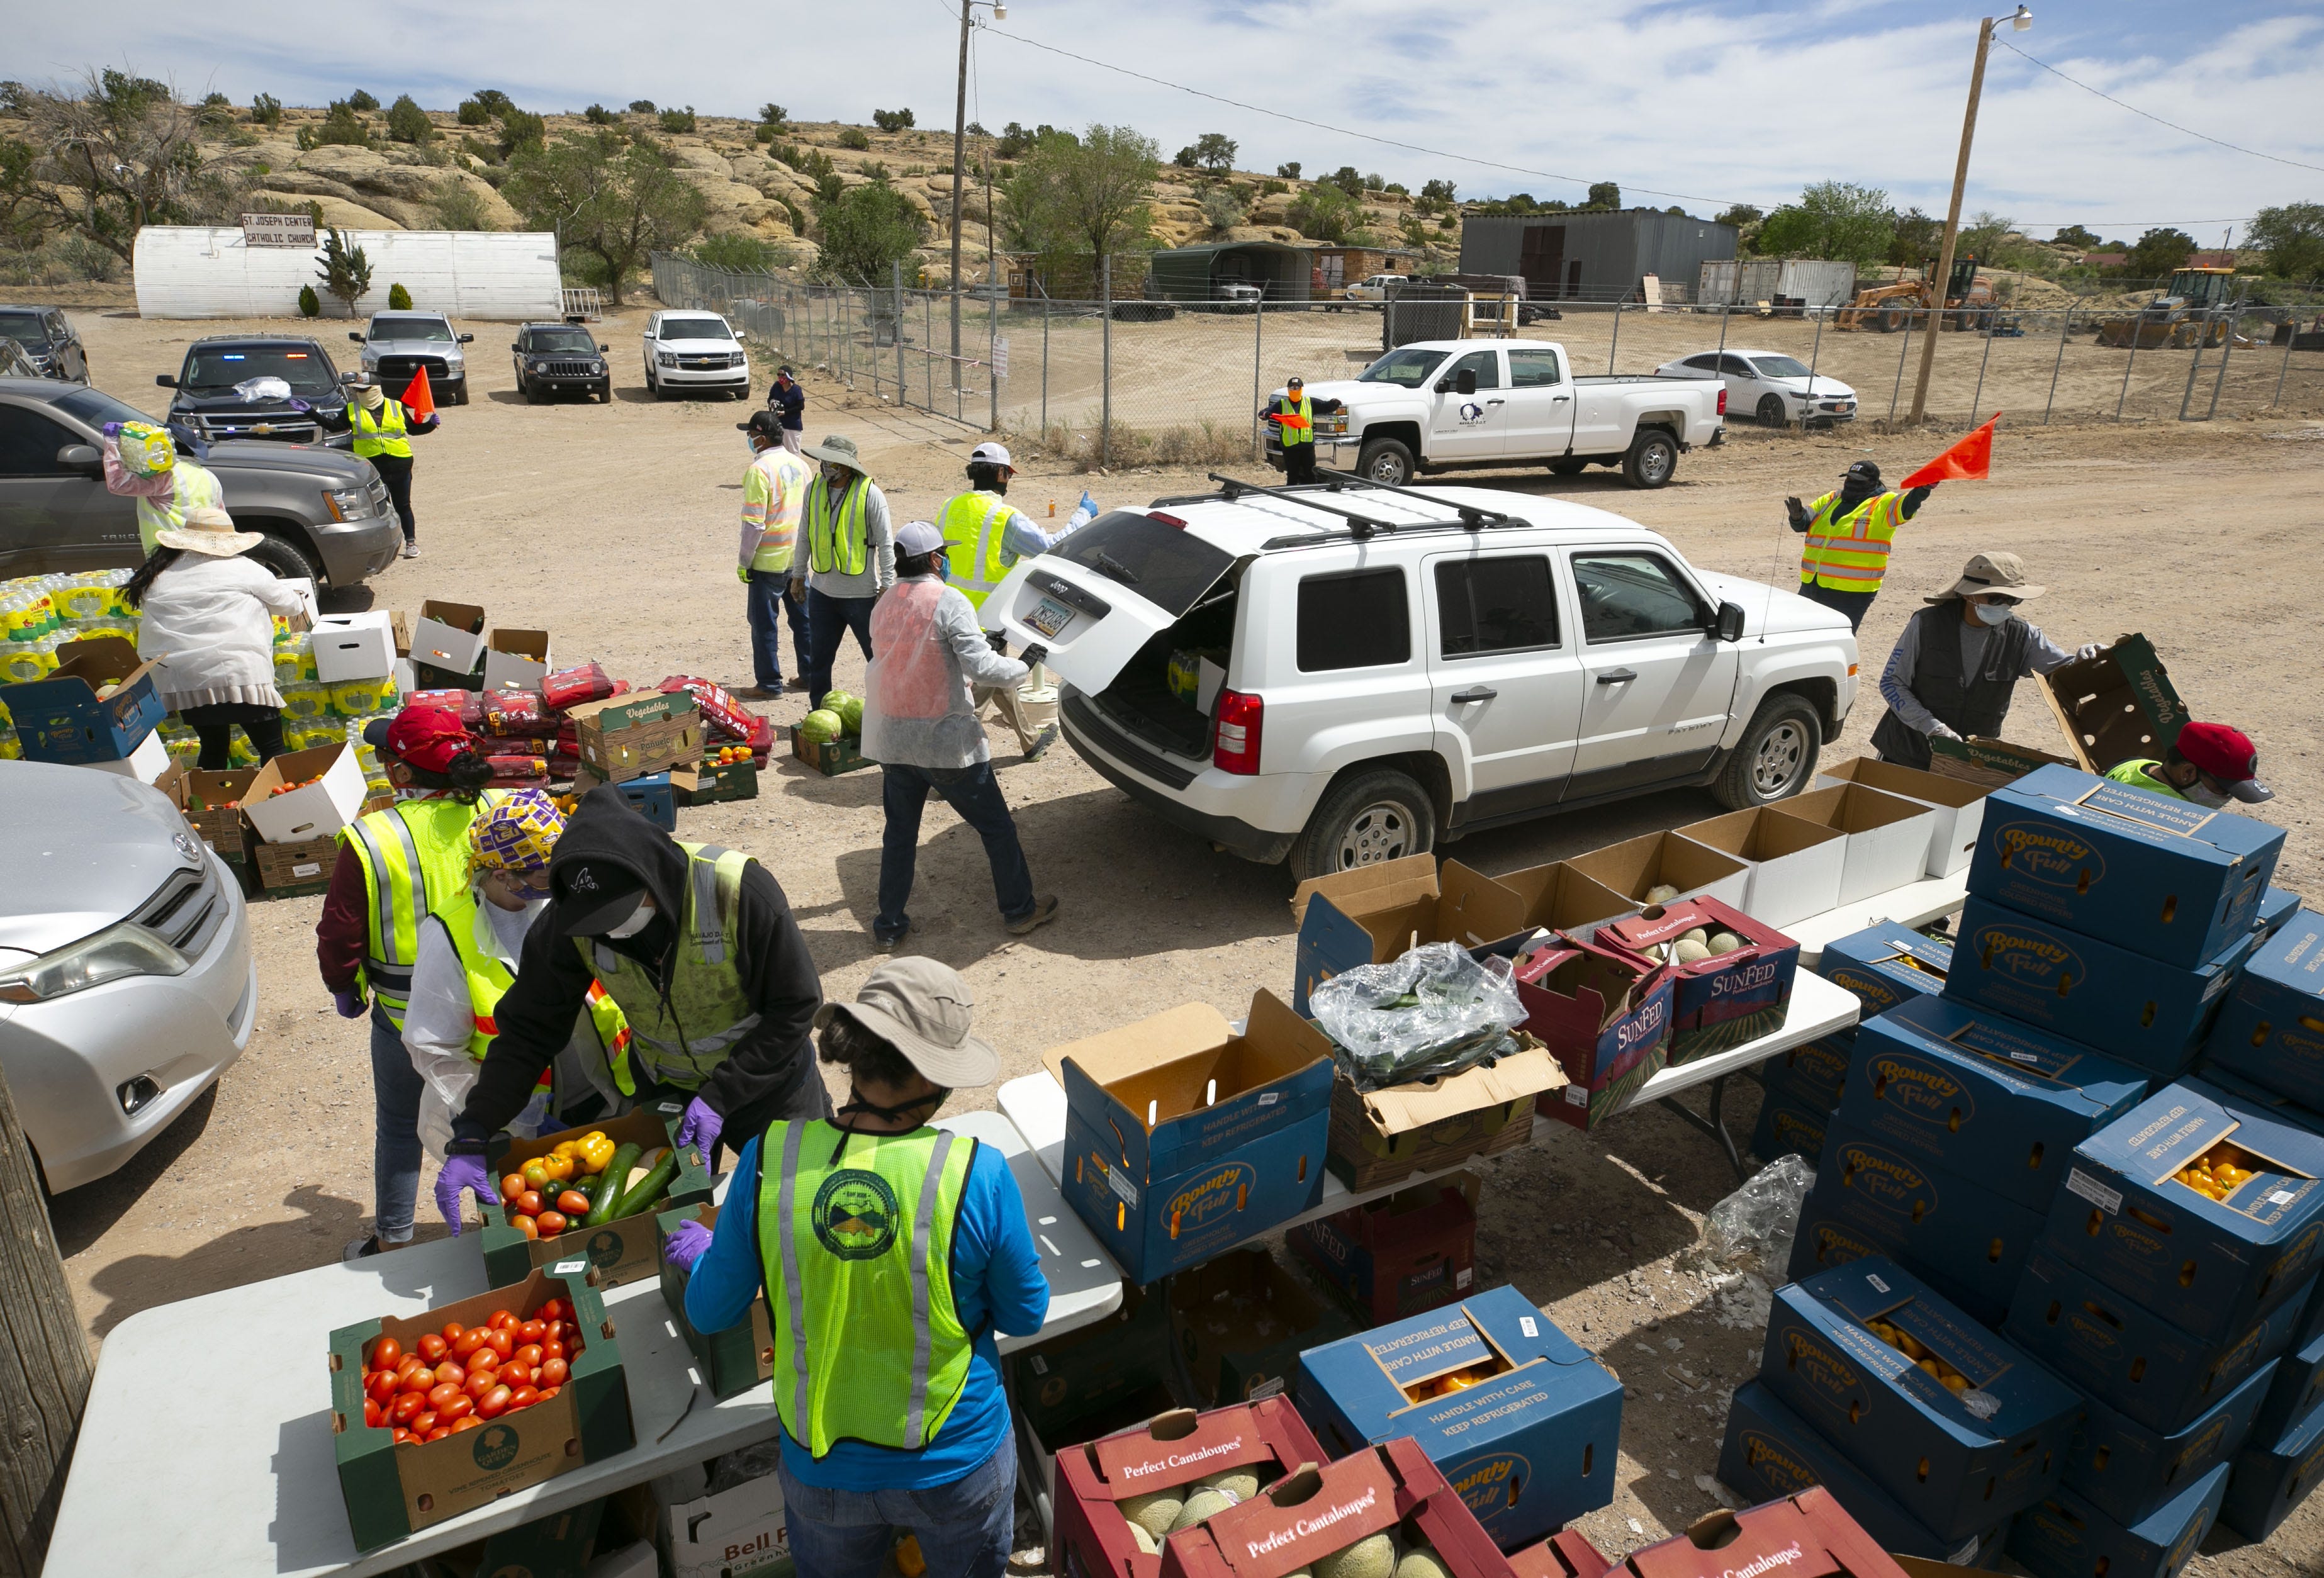 Volunteers, staff member of the Coyote Canyon chapter and the Navajo Nation Office of the President and Vice President, place fresh food, water and dog food into community members' vehicles at a food distribution point before the start of a weekend-long curfew in Coyote Canyon, New Mexico, on the Navajo Nation on May 15, 2020.